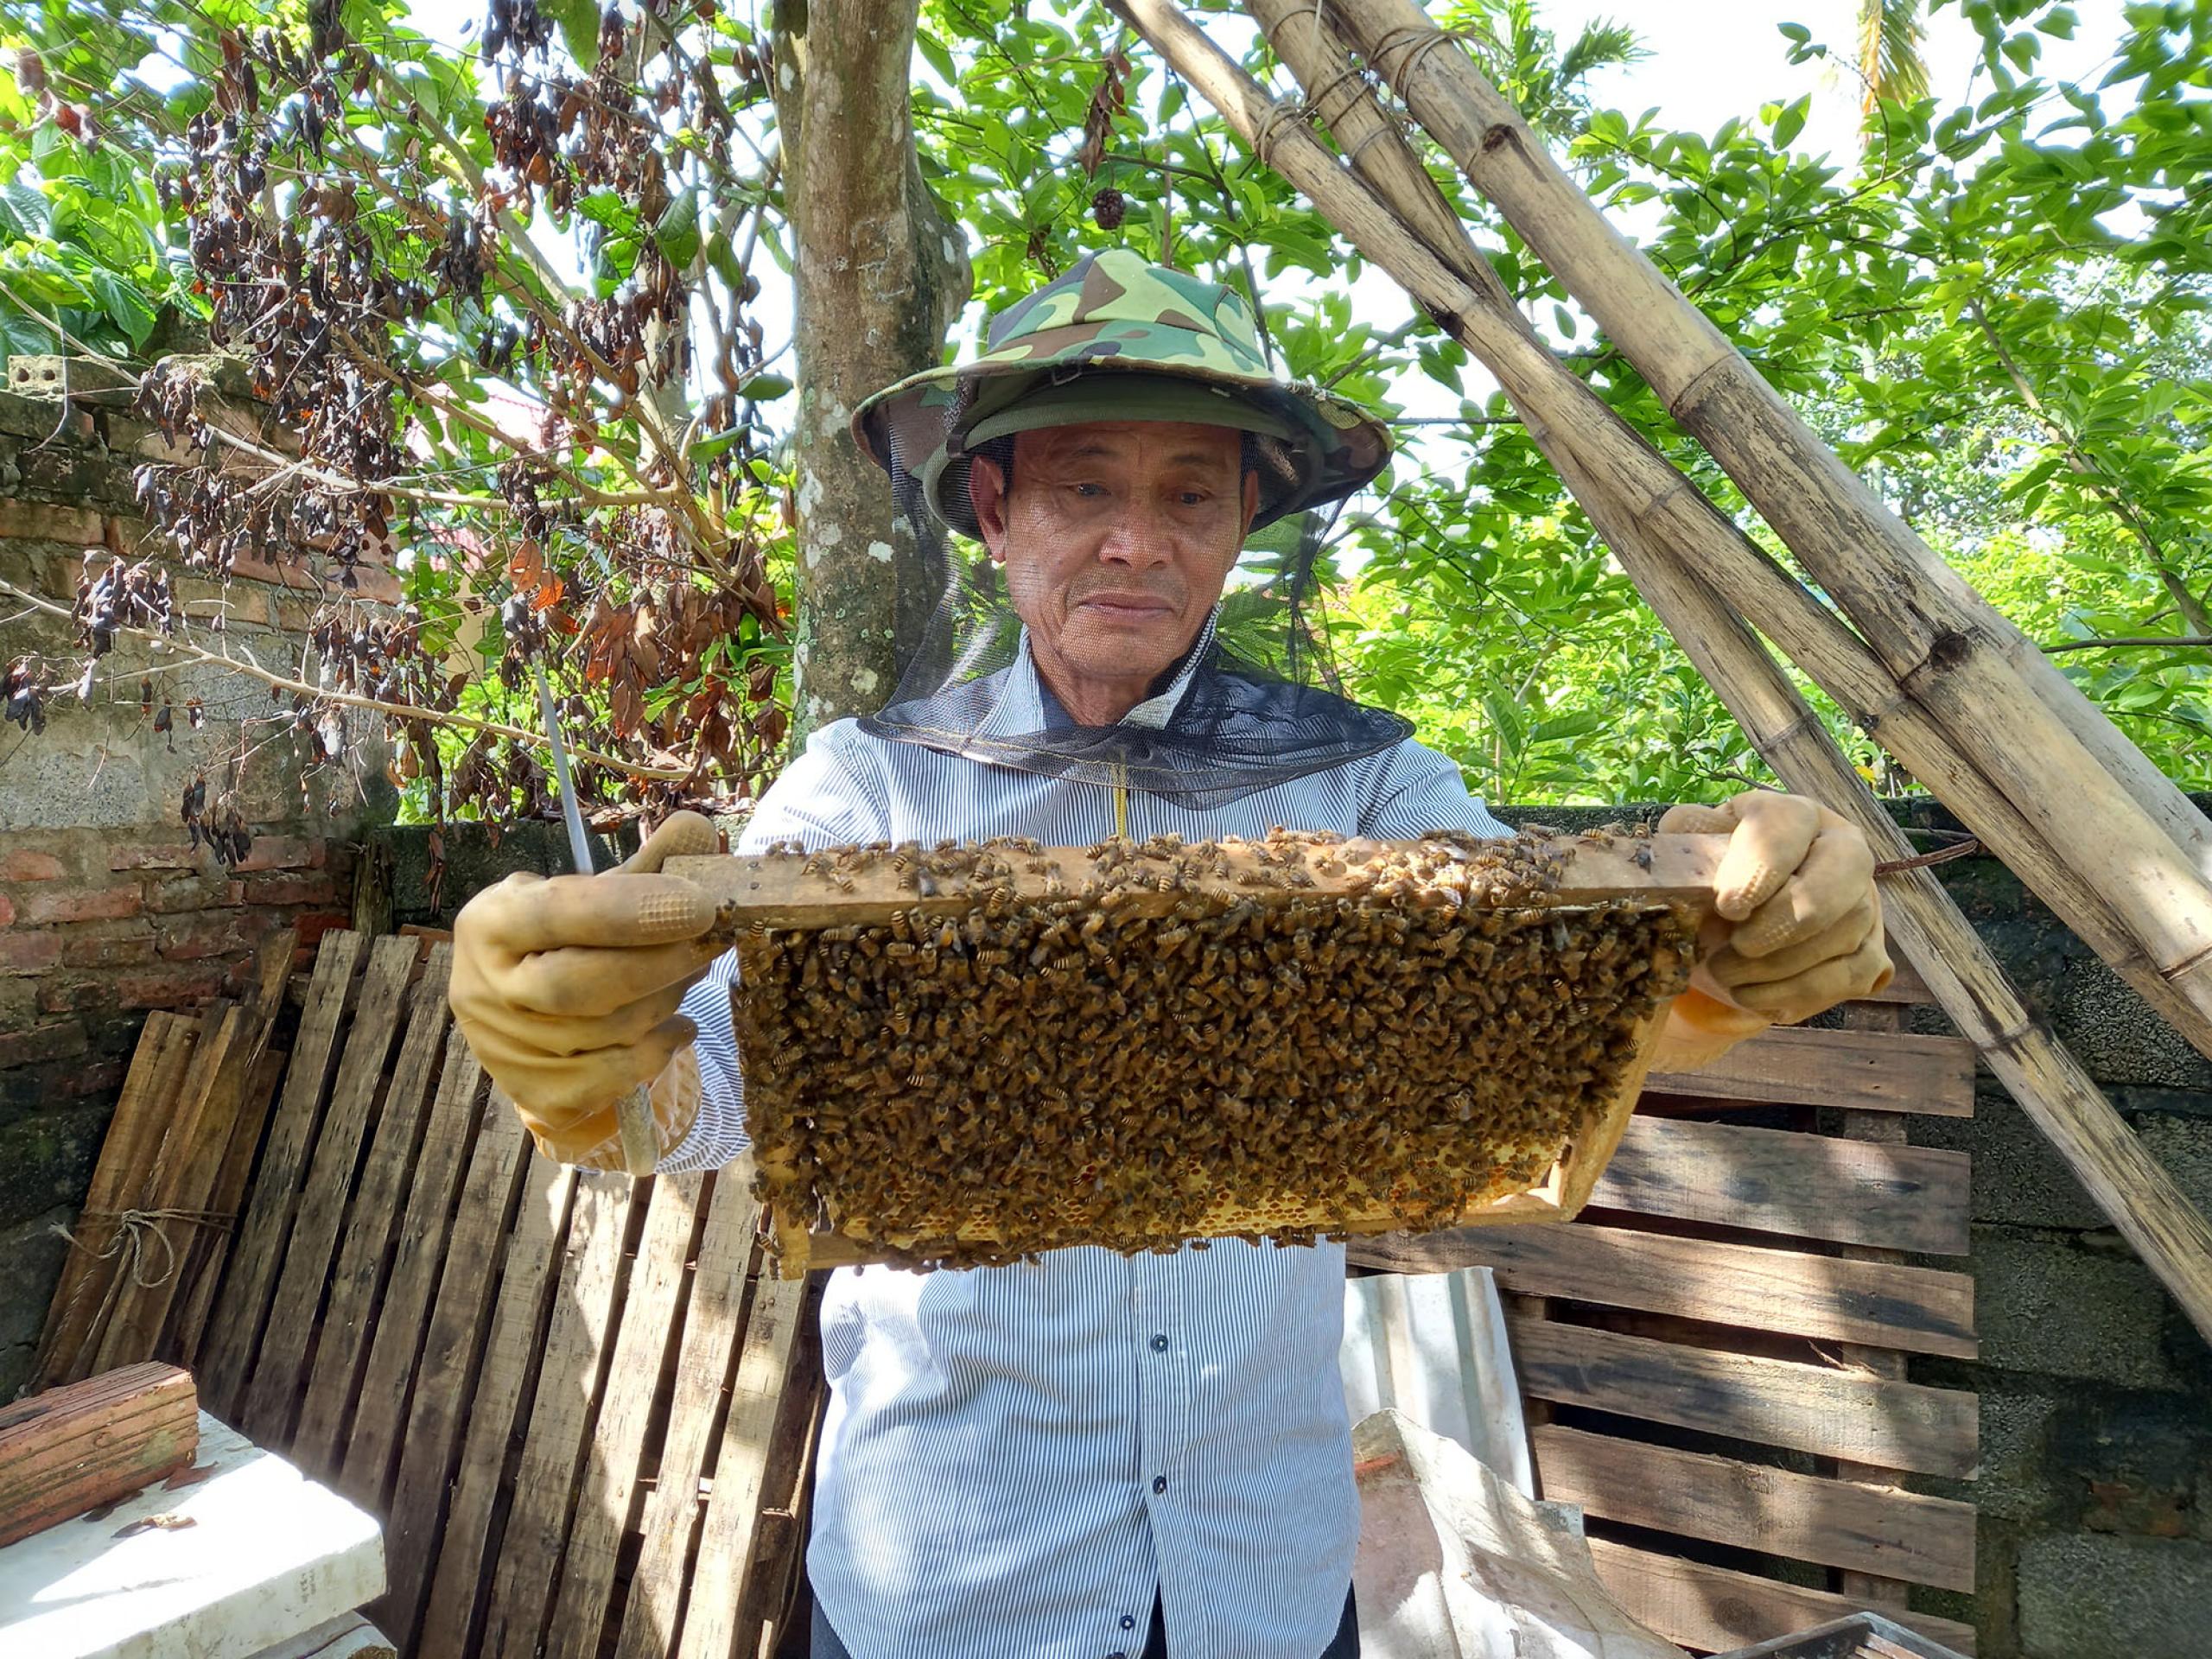 I. The Importance of Beekeeping in Carbon Sequestration